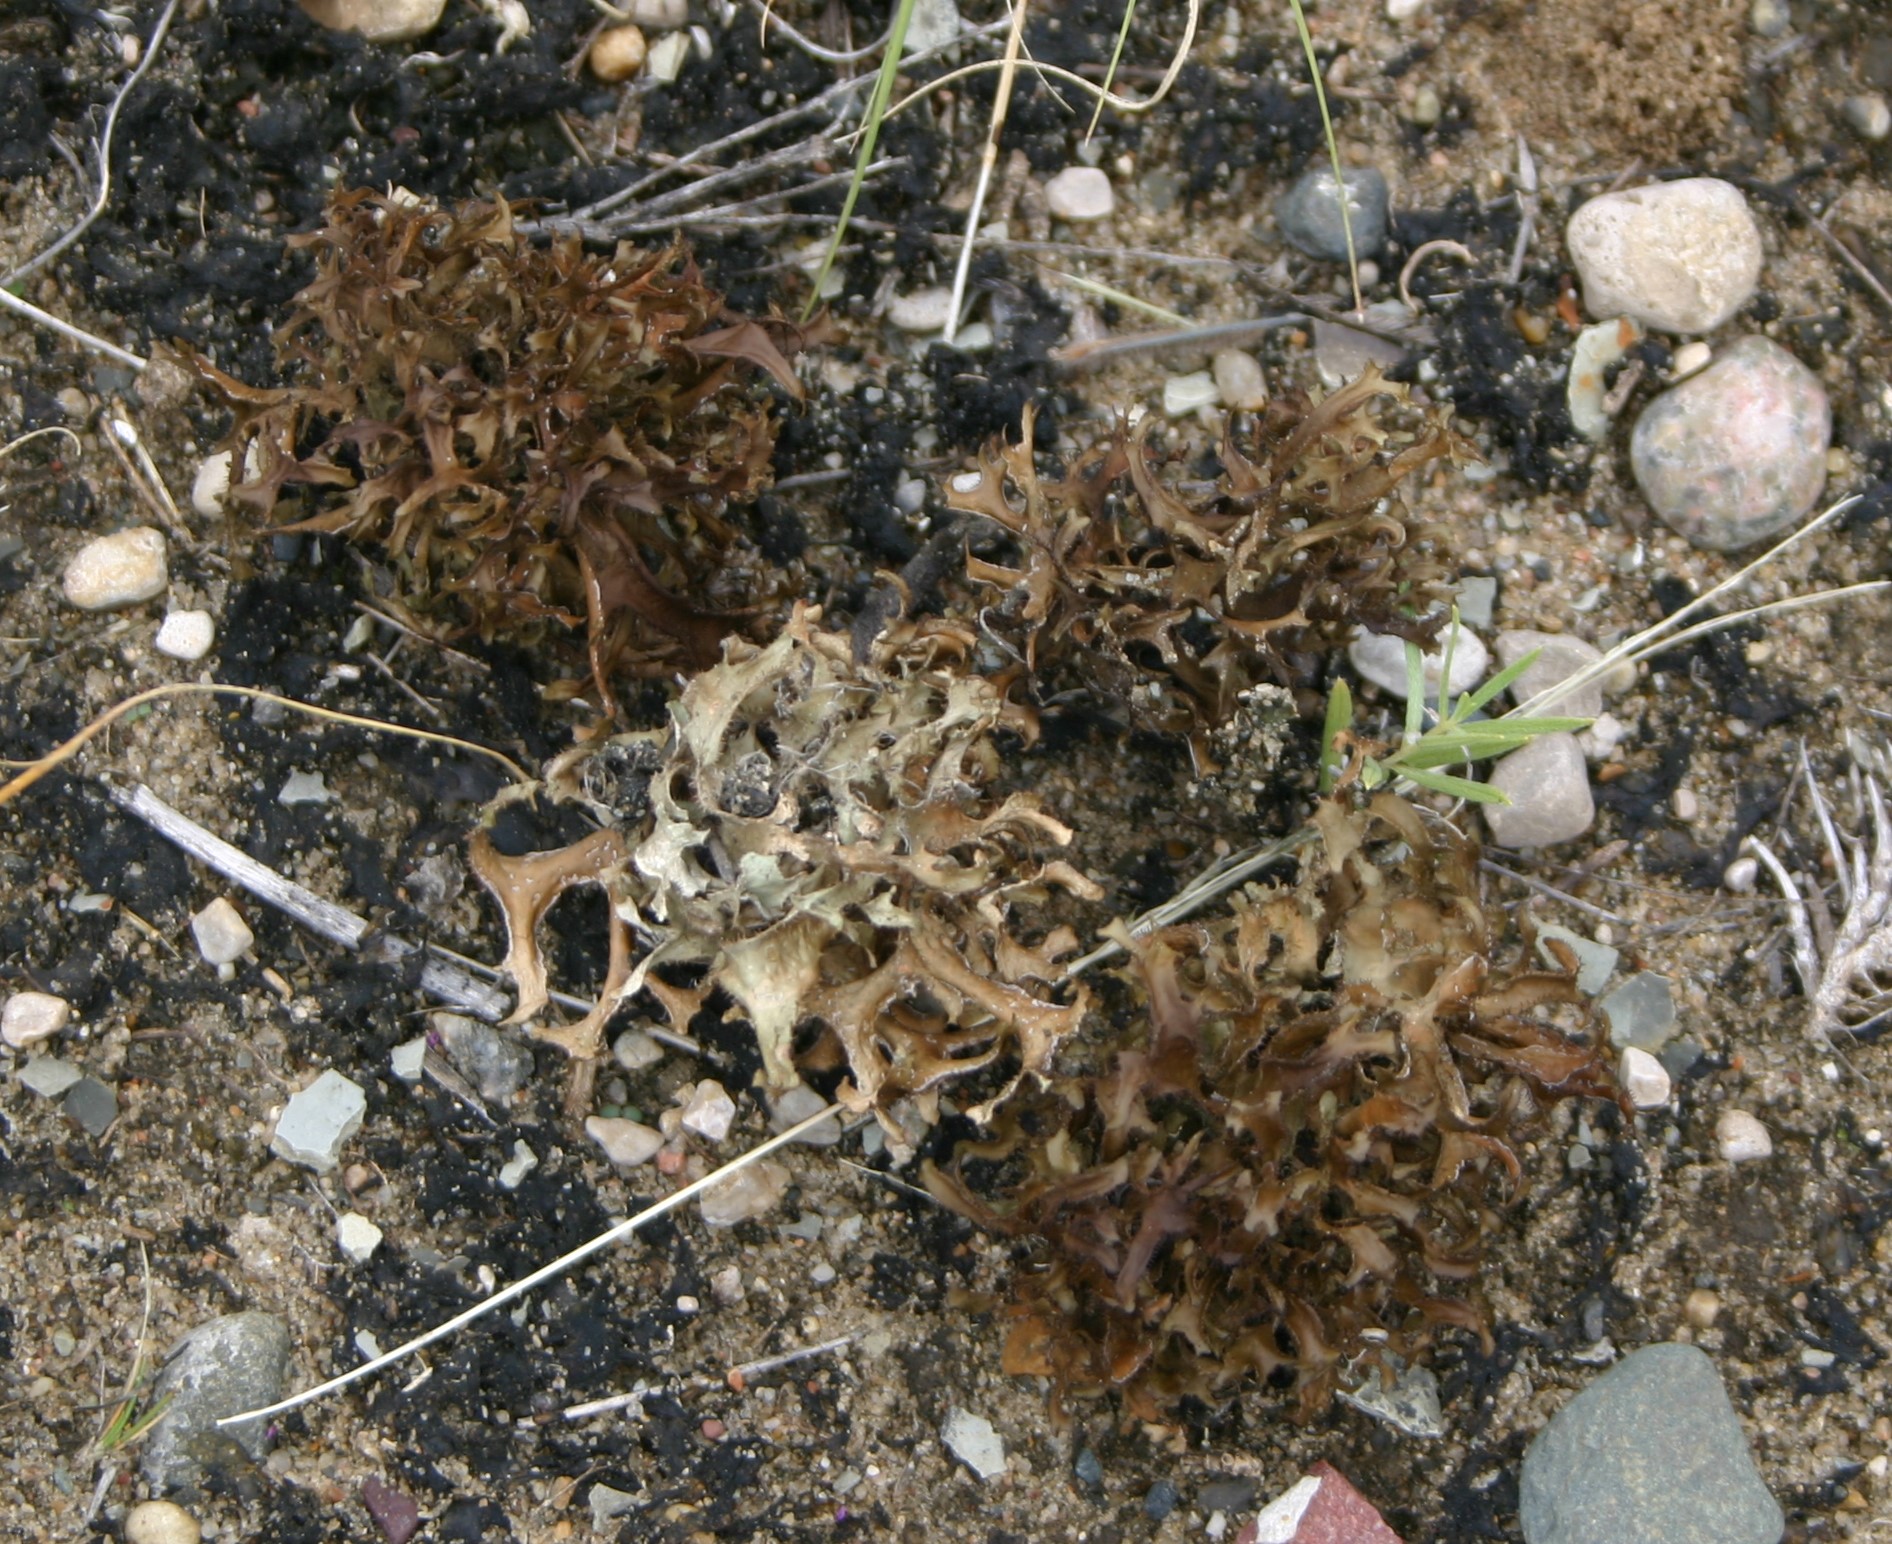 Three small bunches of brown-tan coloured lichen growing from sandy and rocky soil.